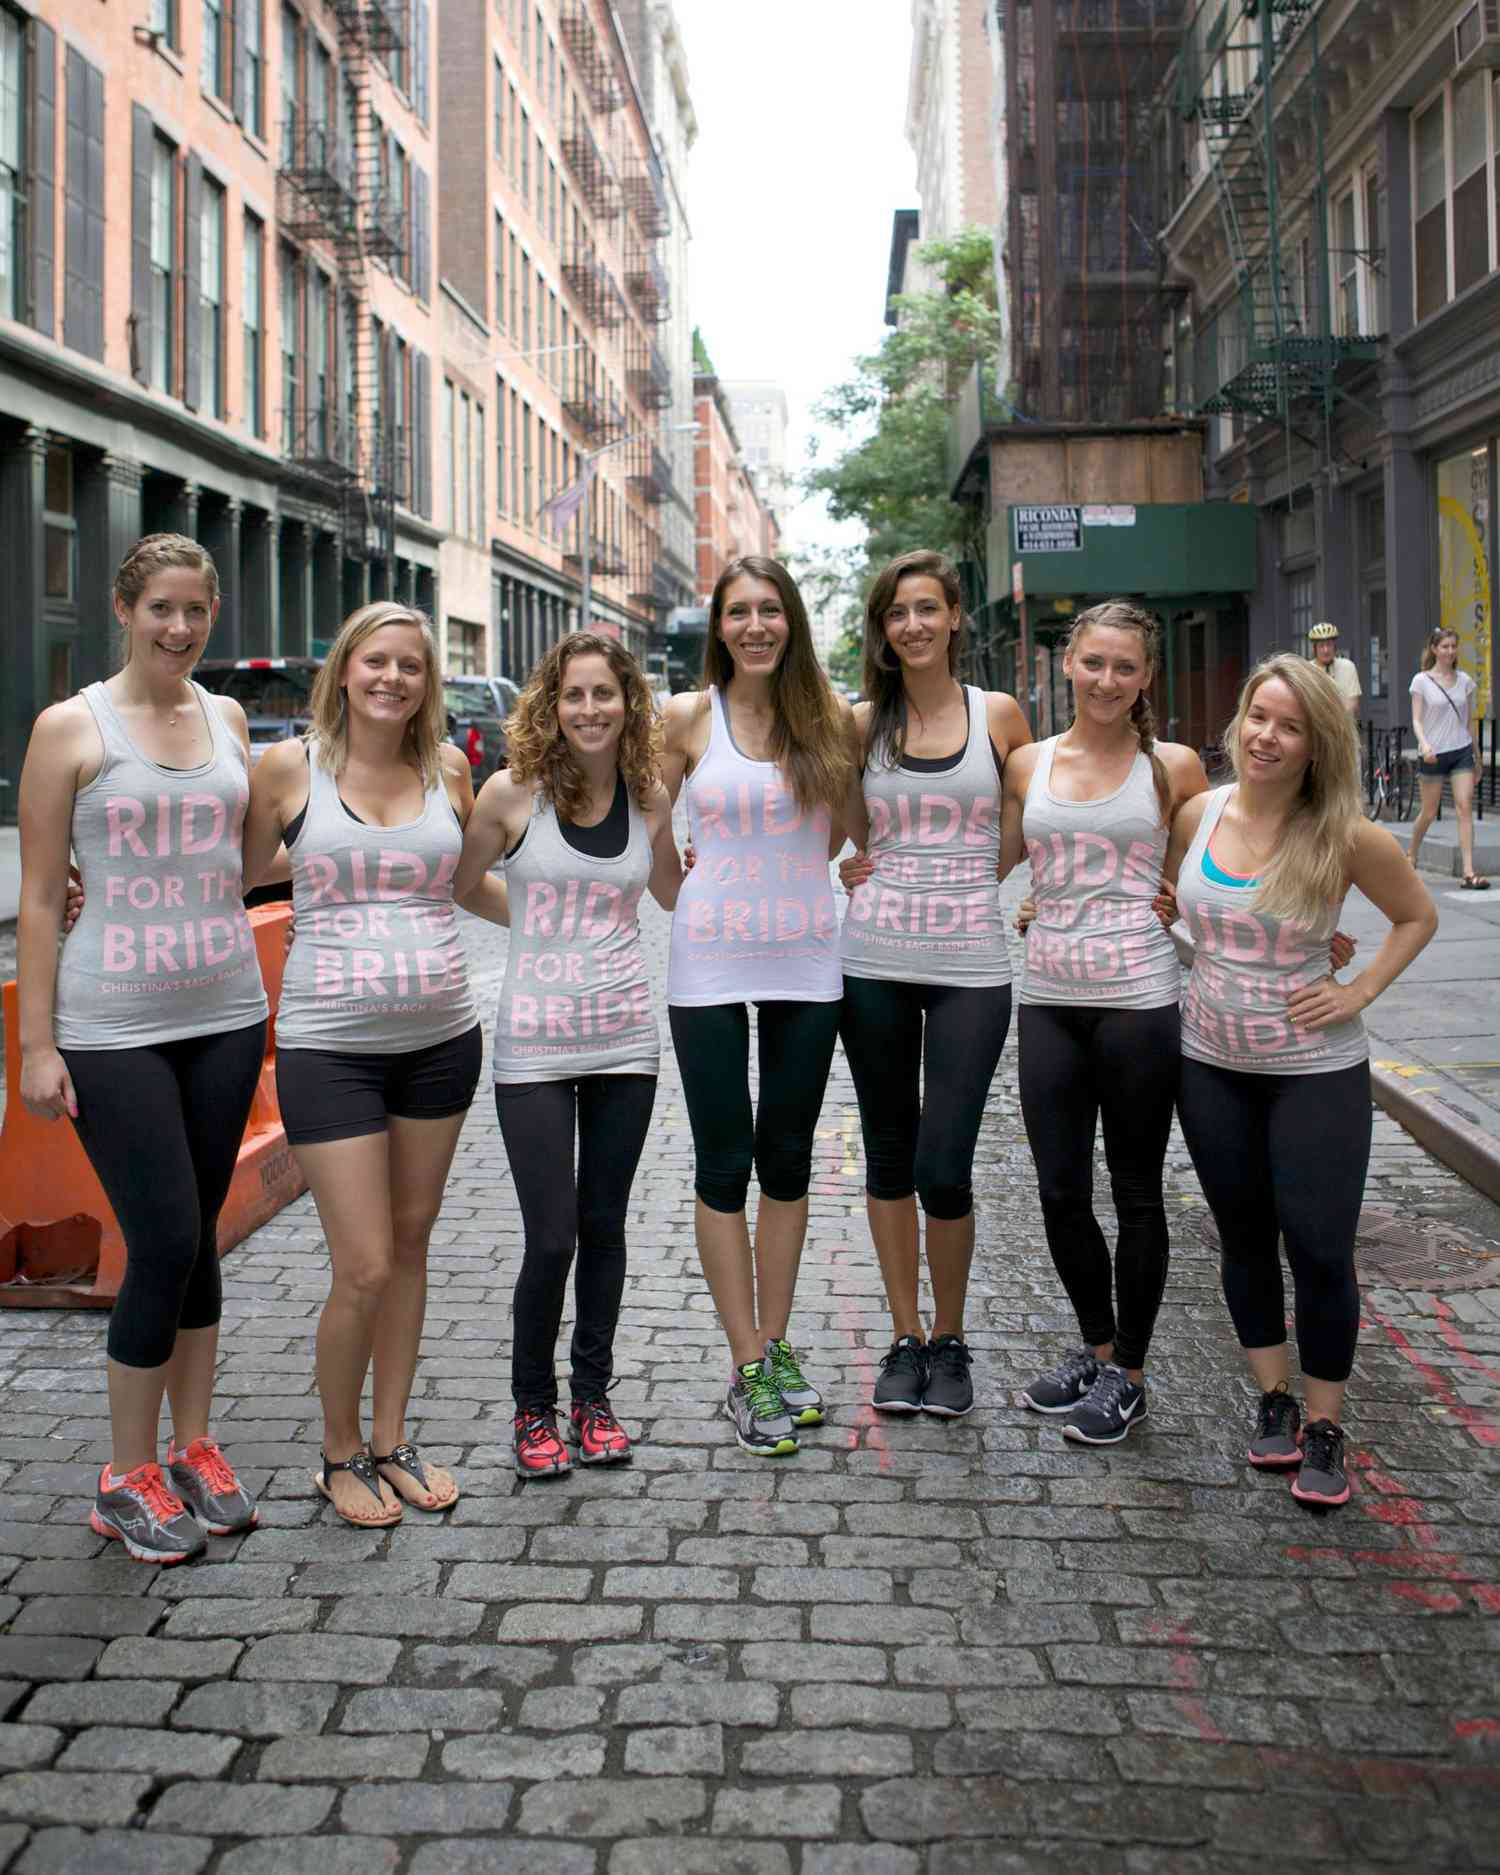 soulcycle-christina-bachelorette-party-group-photo-0815.jpg